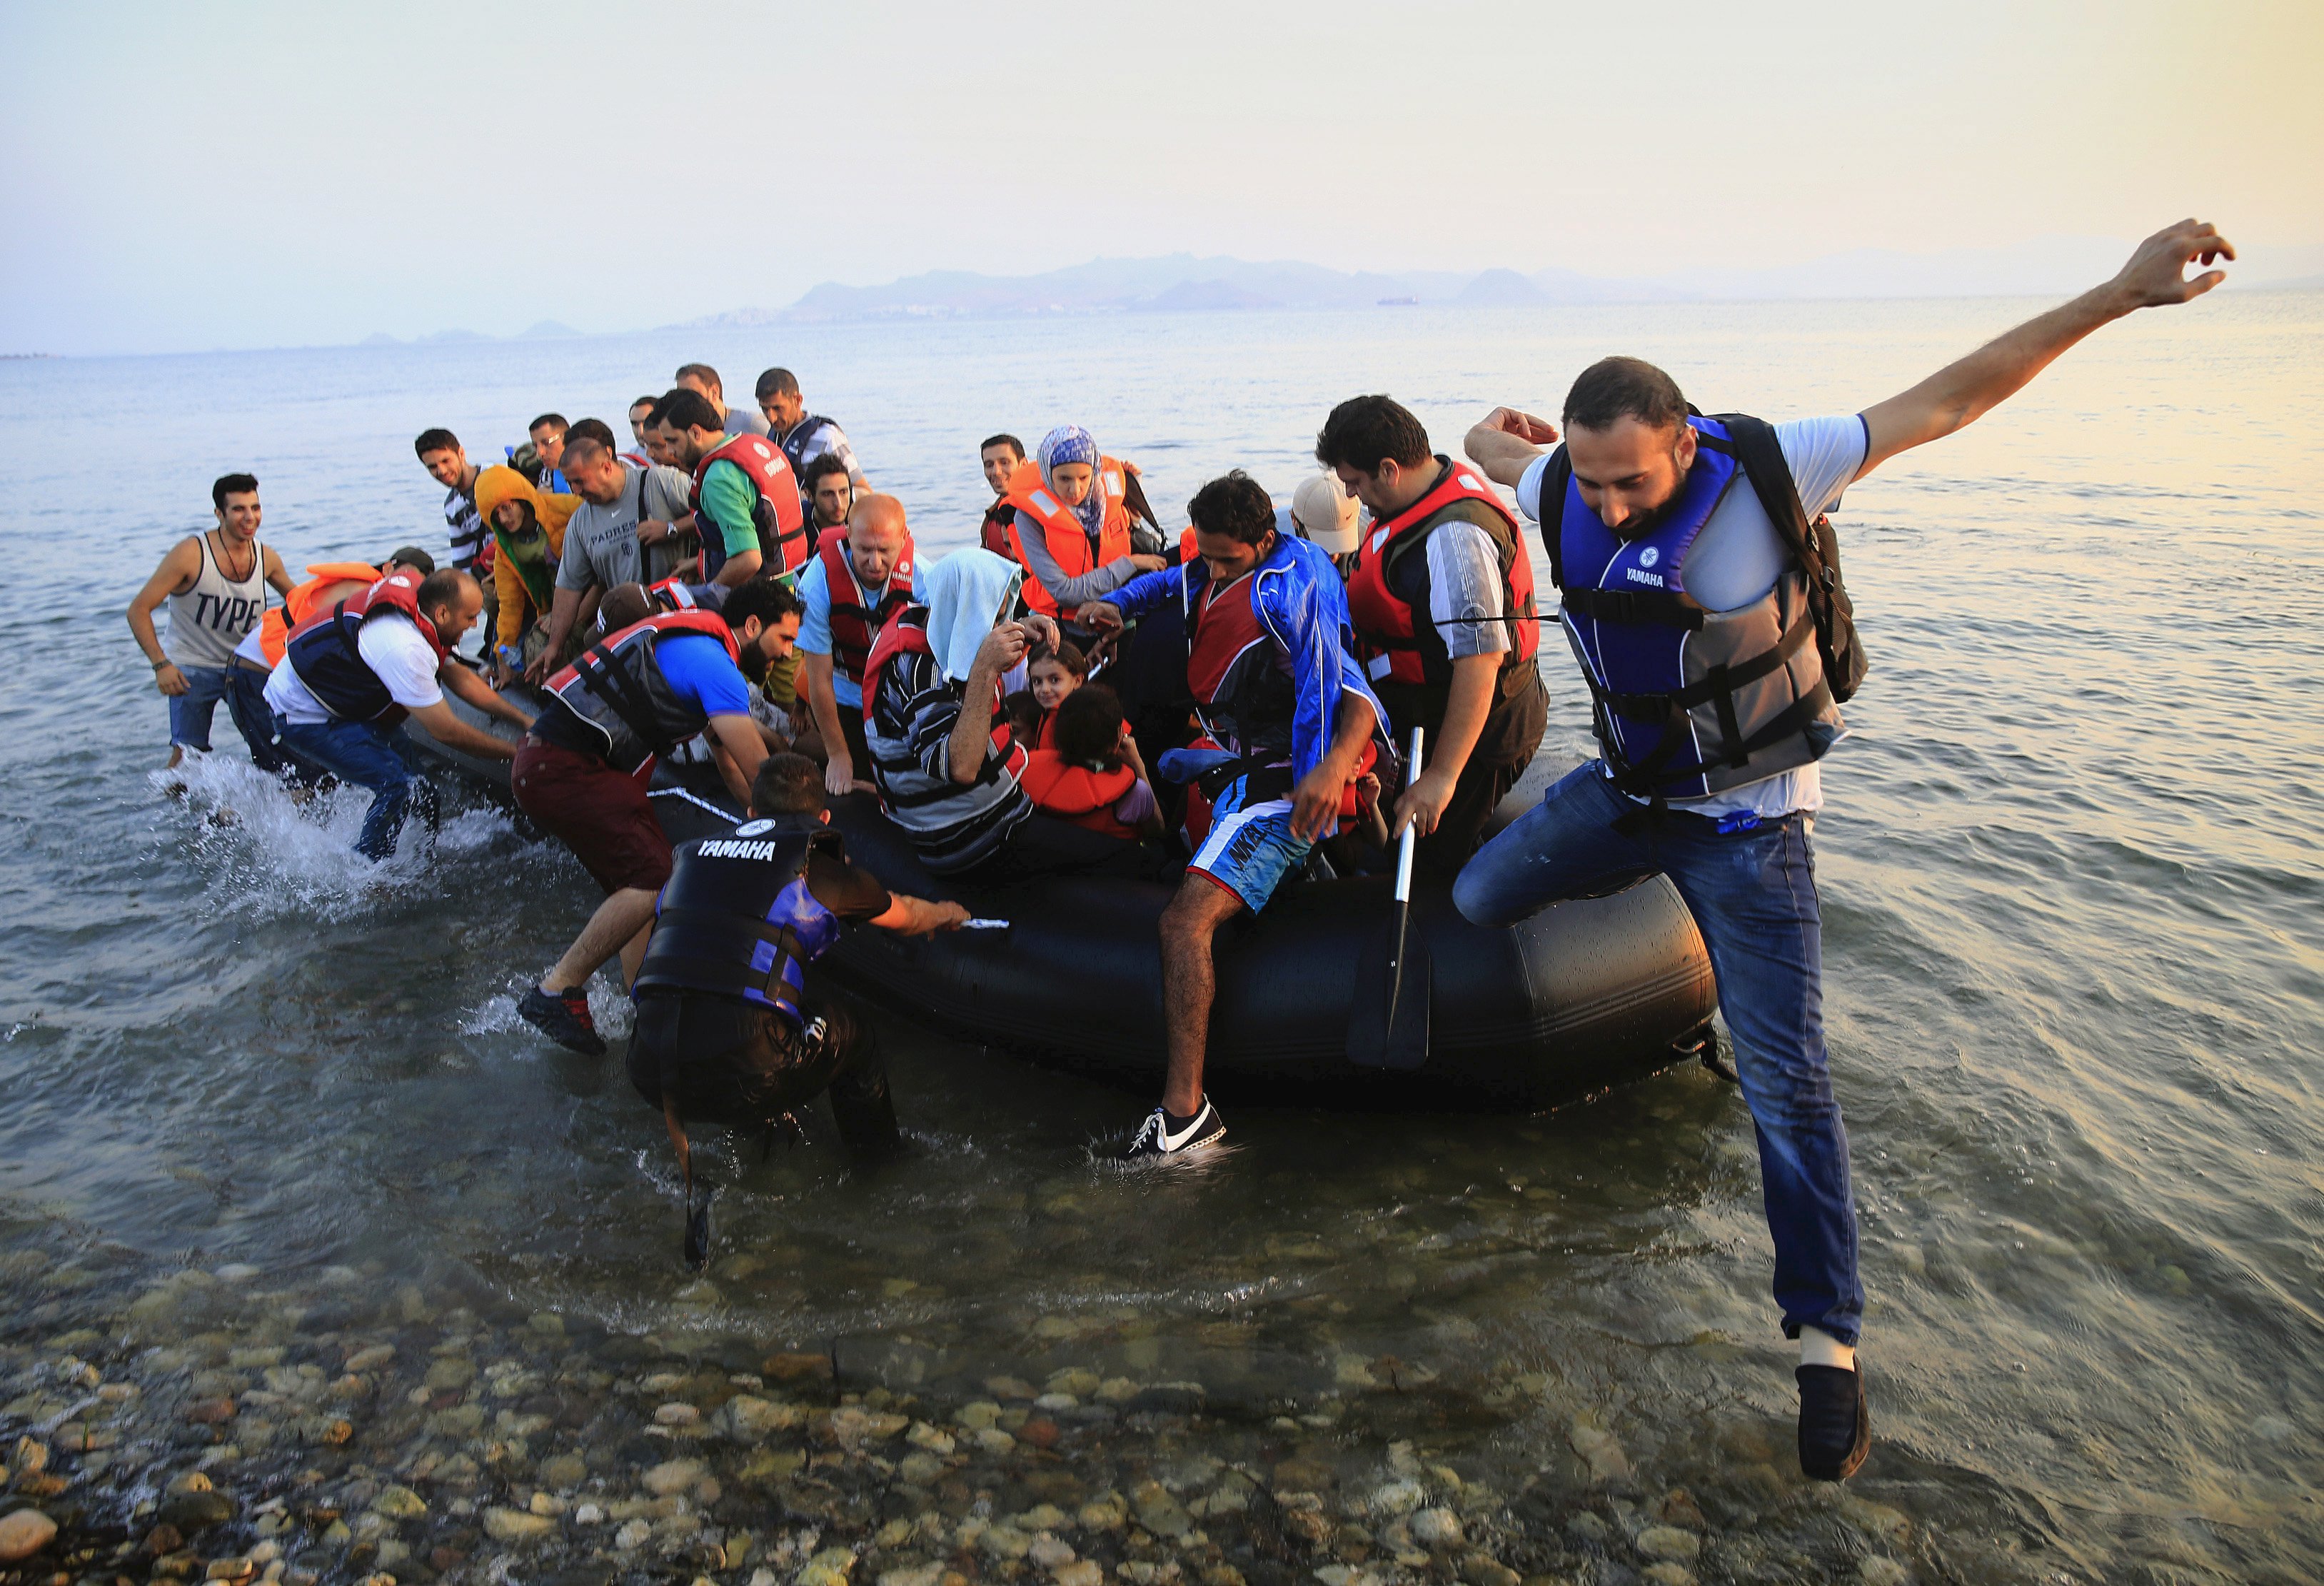 Syrian refugees arrive at a beach on the Greek island of Kos, August 11, 2015.